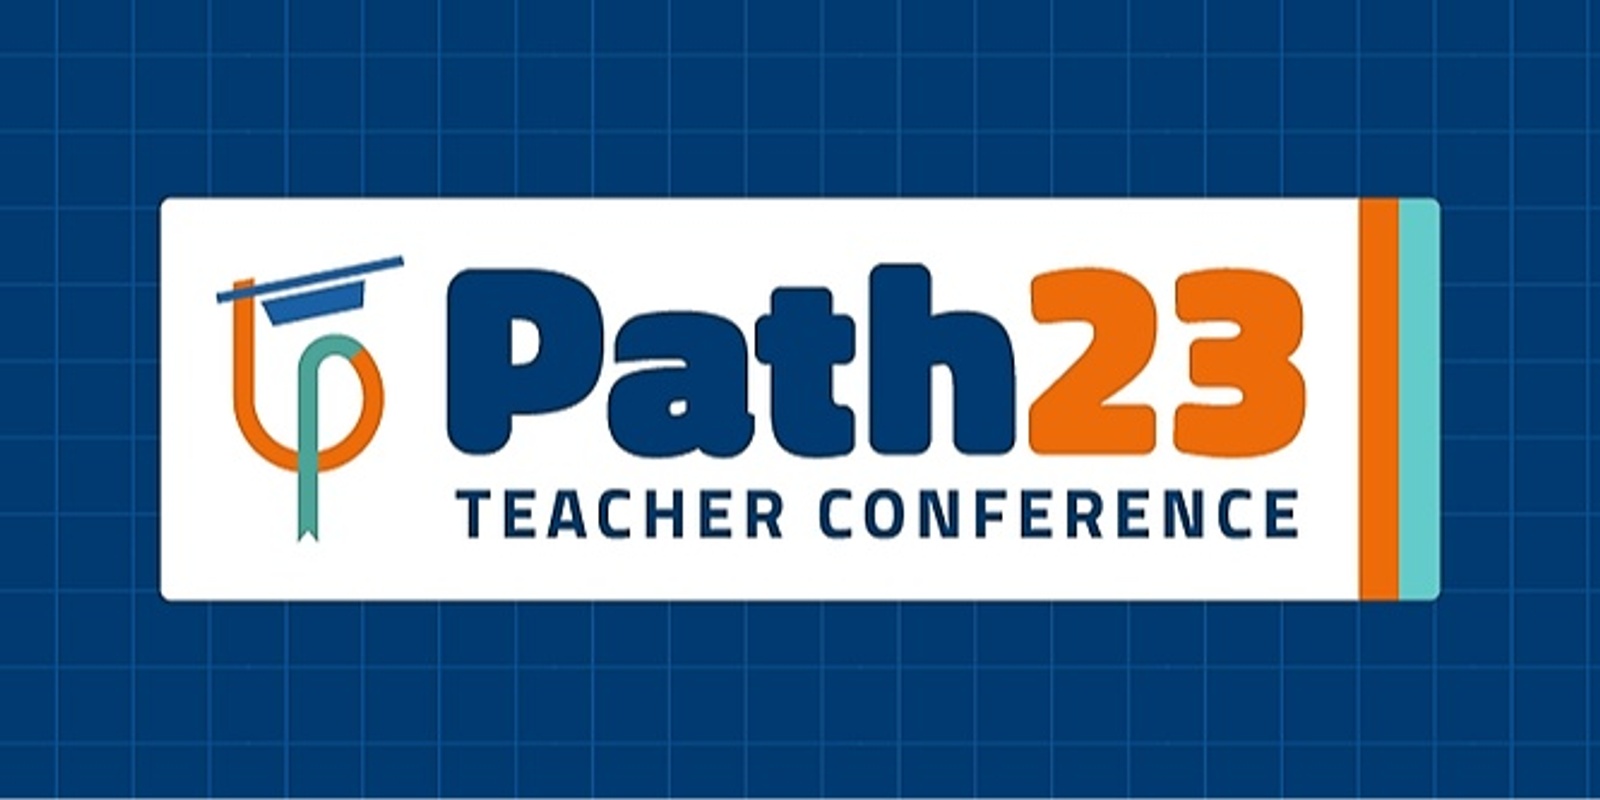 Banner image for Maths Pathway Path23 Teacher Conference - Queensland